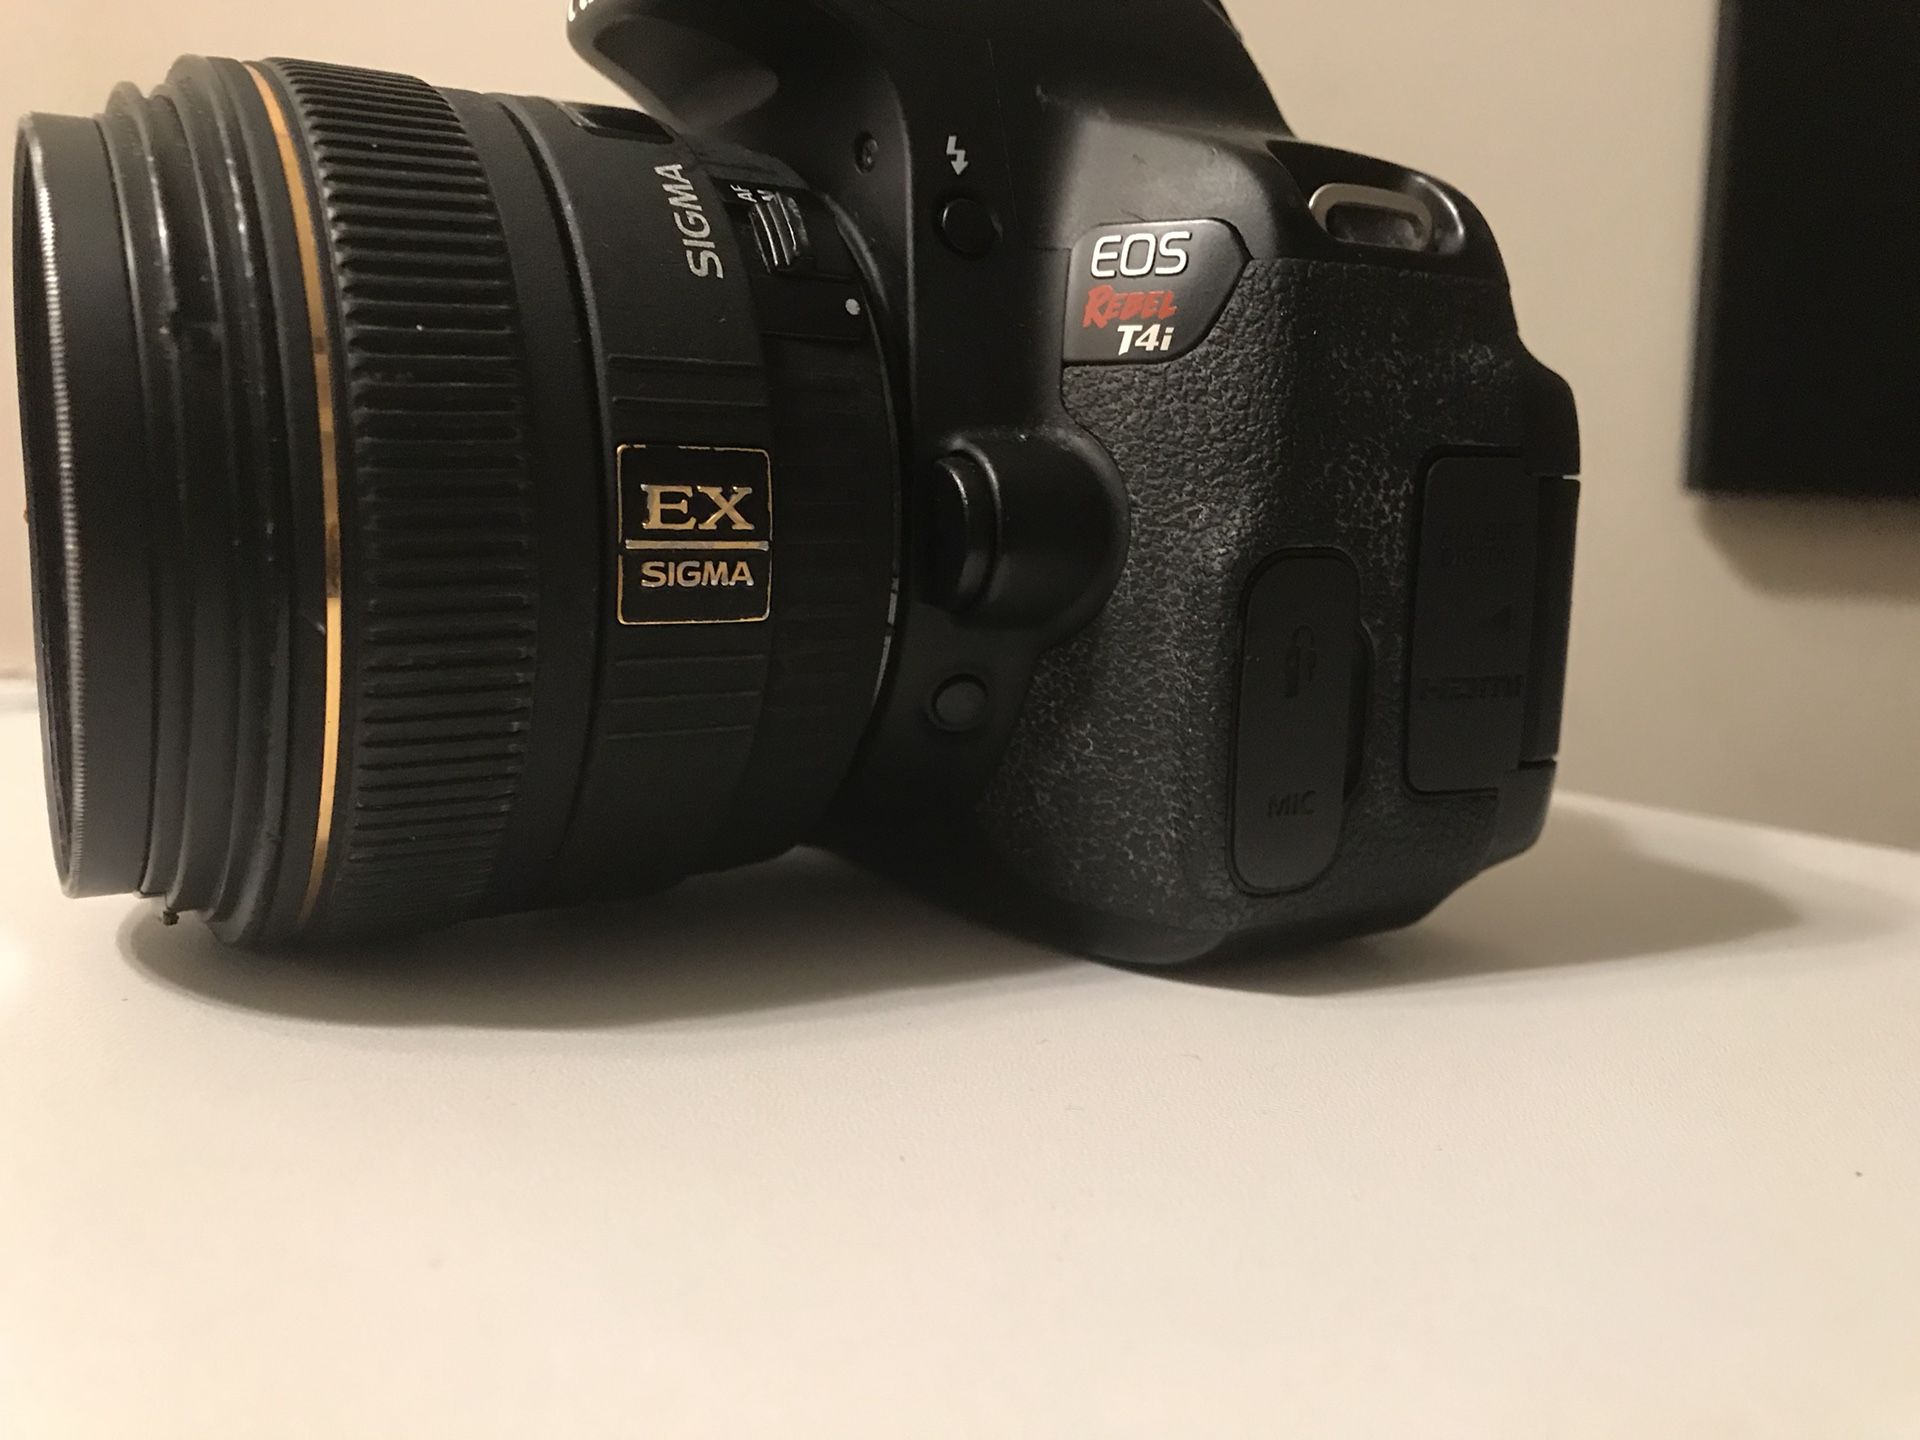 Canon t4i dslr with sigma 30mm 1.4